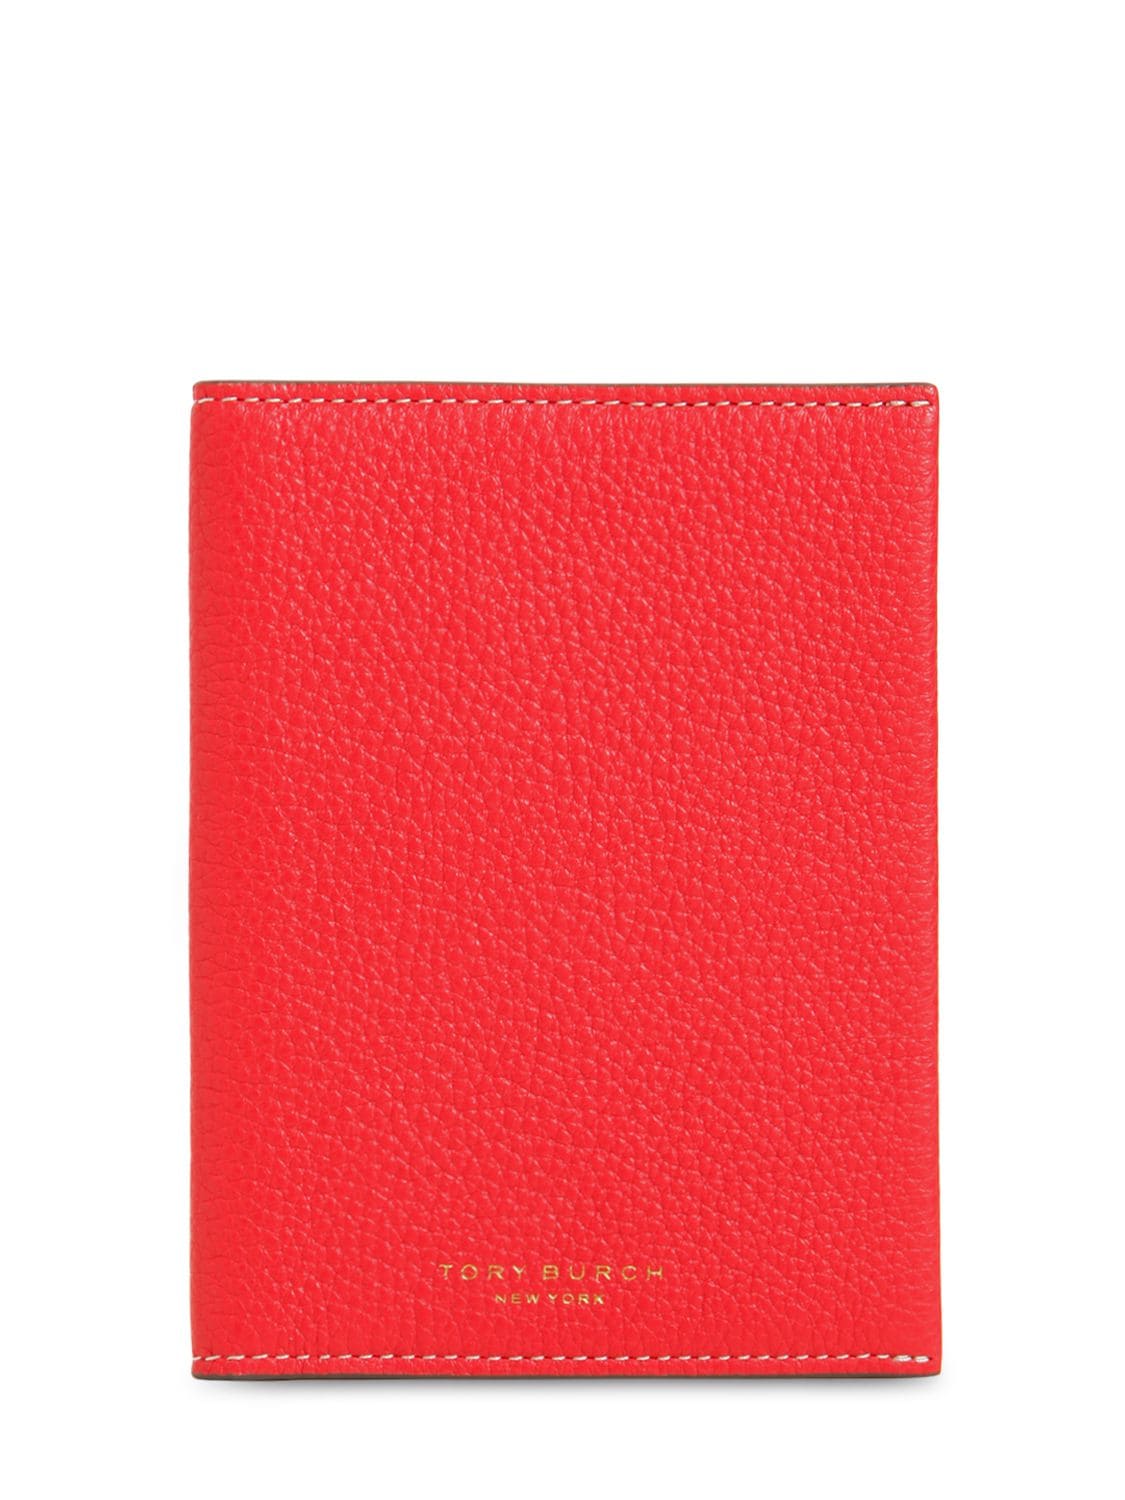 TORY BURCH PERRY LEATHER PASSPORT HOLDER,71IL4W027-NJQ20